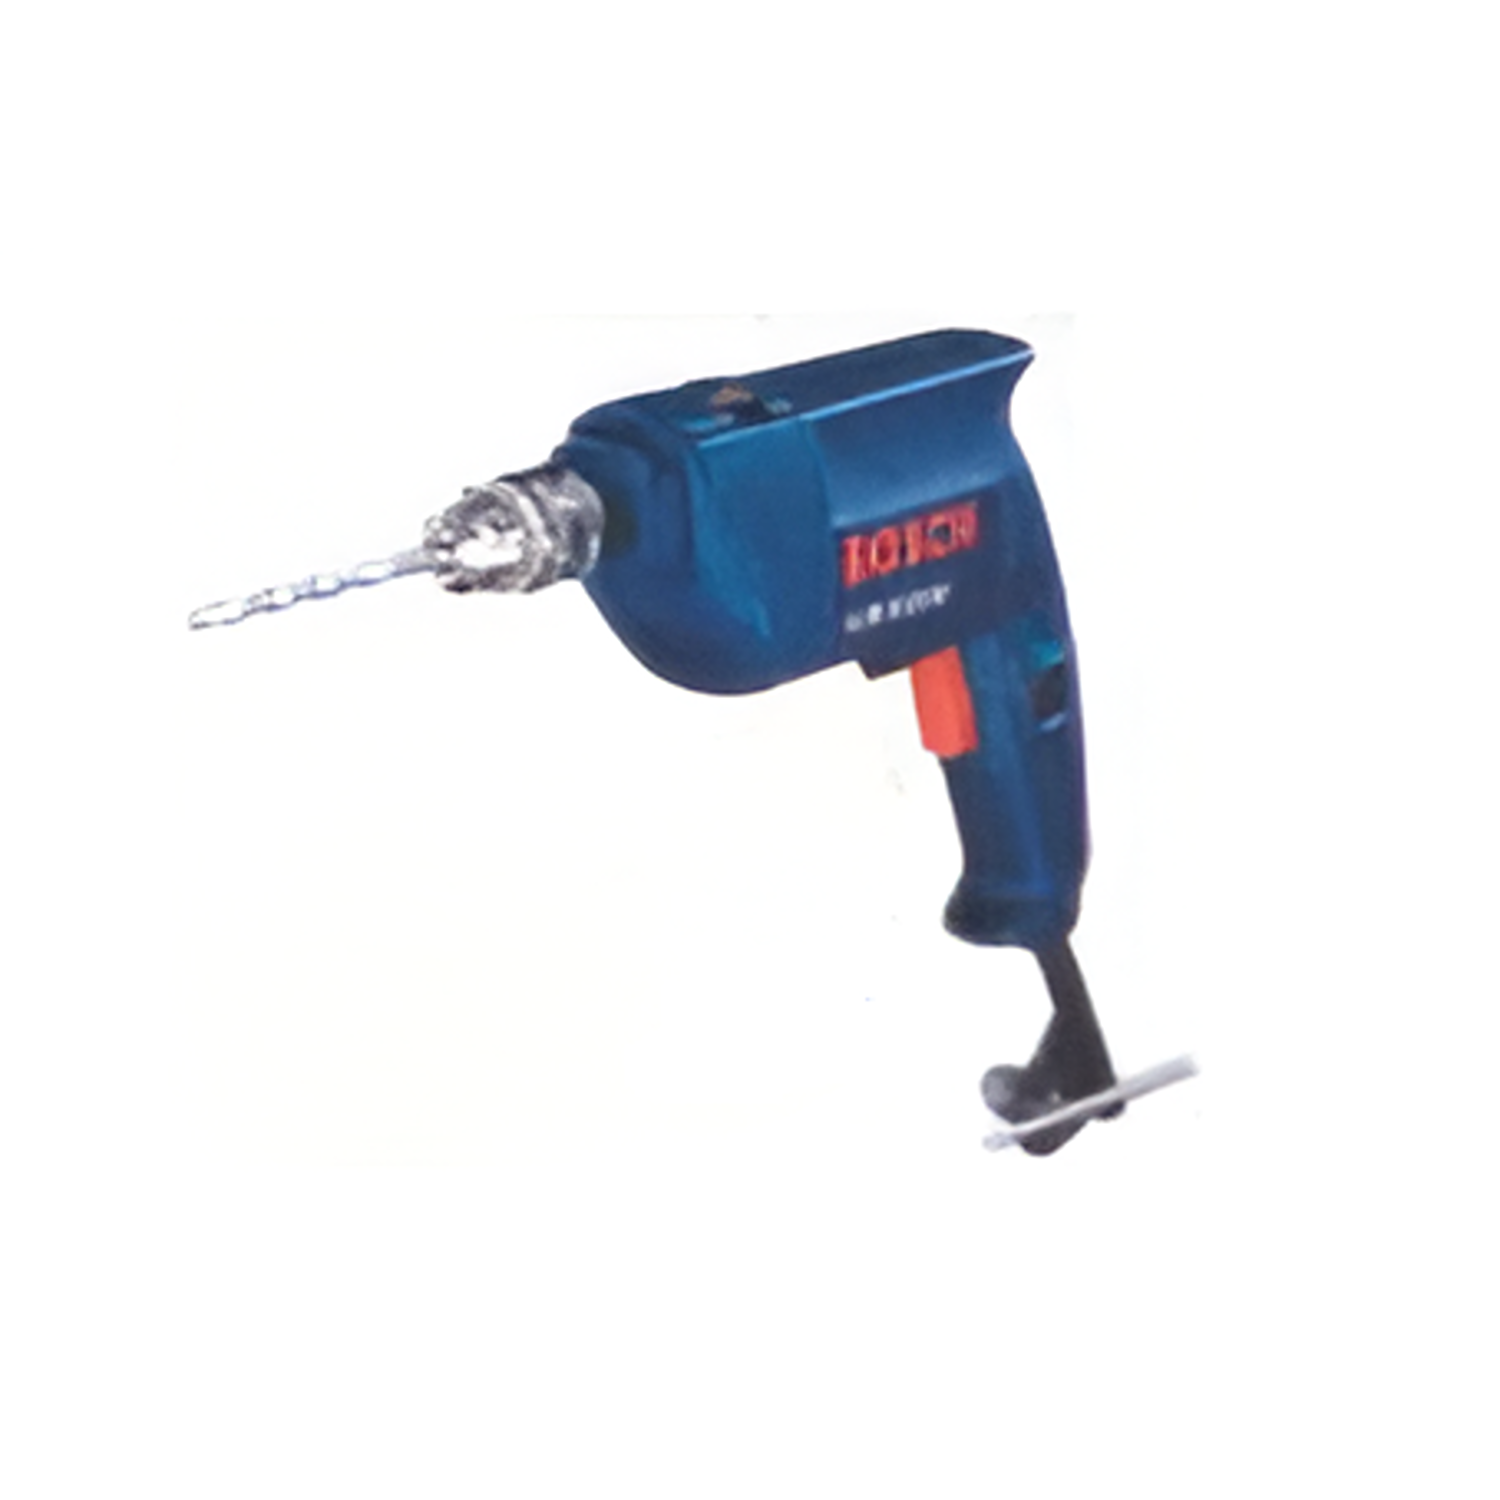 YEW AIK AC00347 Impact Drill Power Tools GSB 400 RE - Premium Power Tools from YEW AIK - Shop now at Yew Aik.